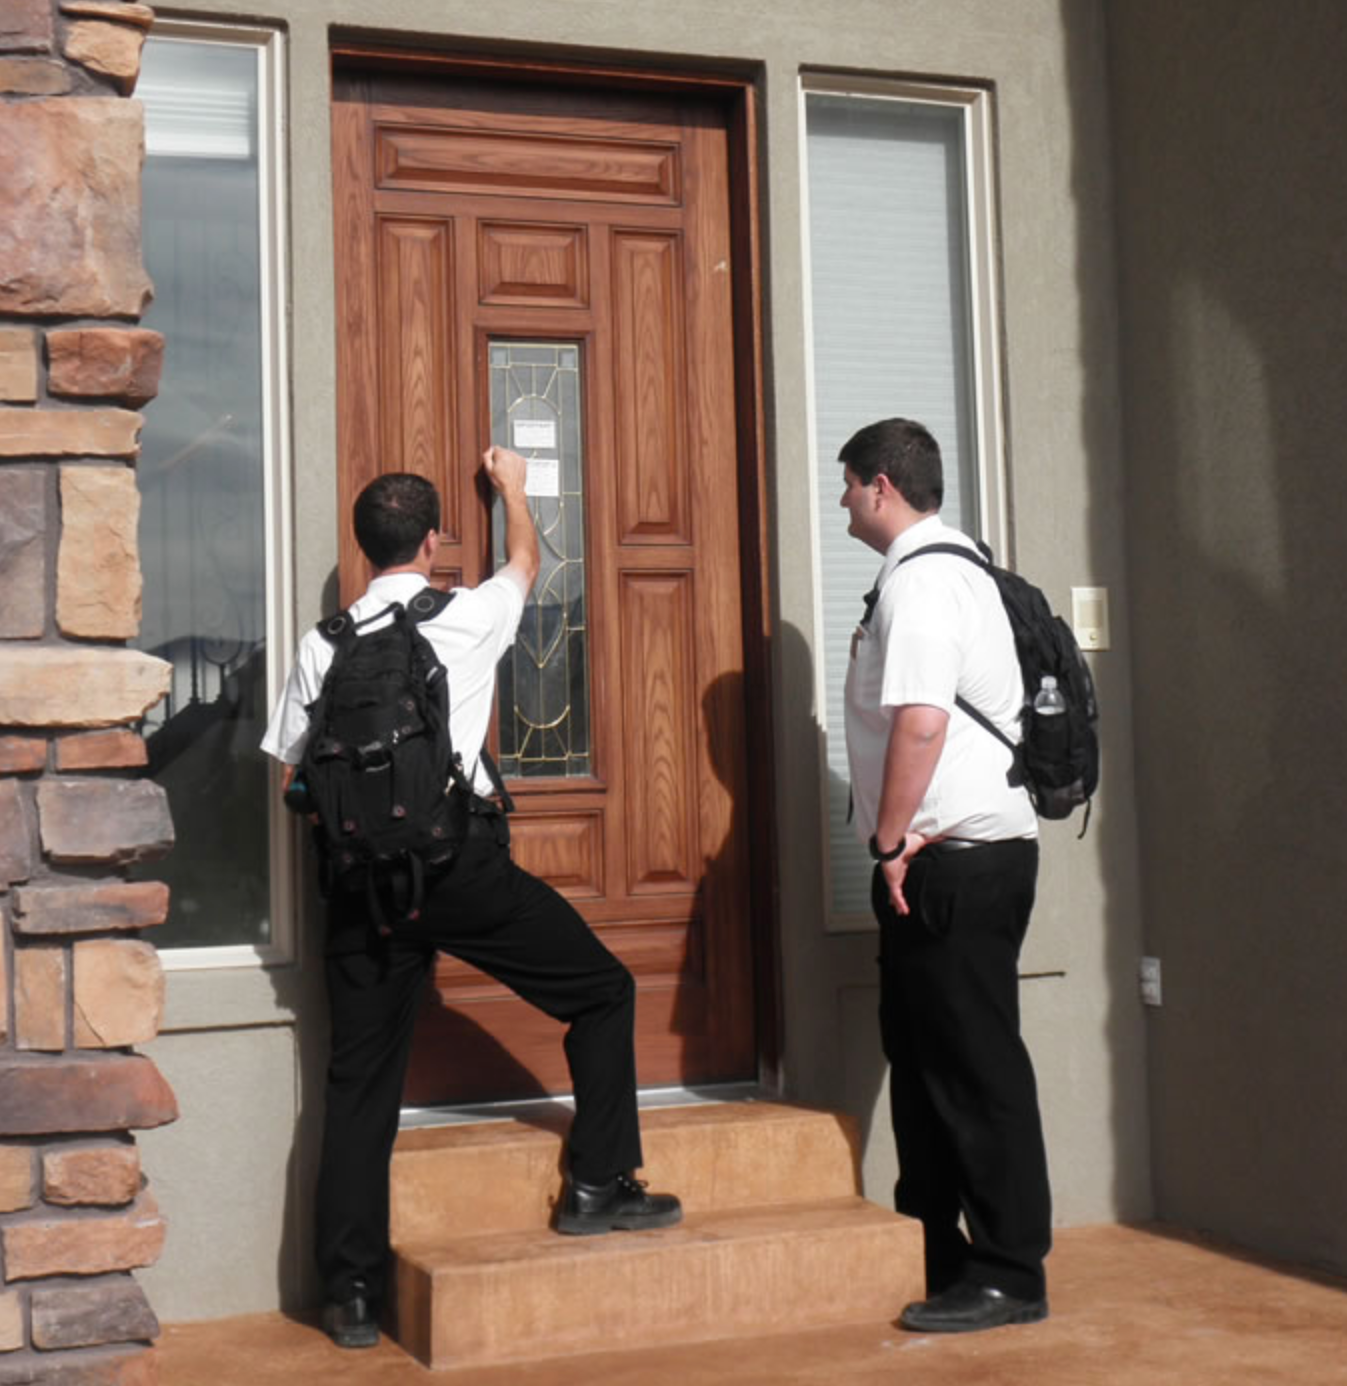 High Quality Mormons at door Blank Meme Template